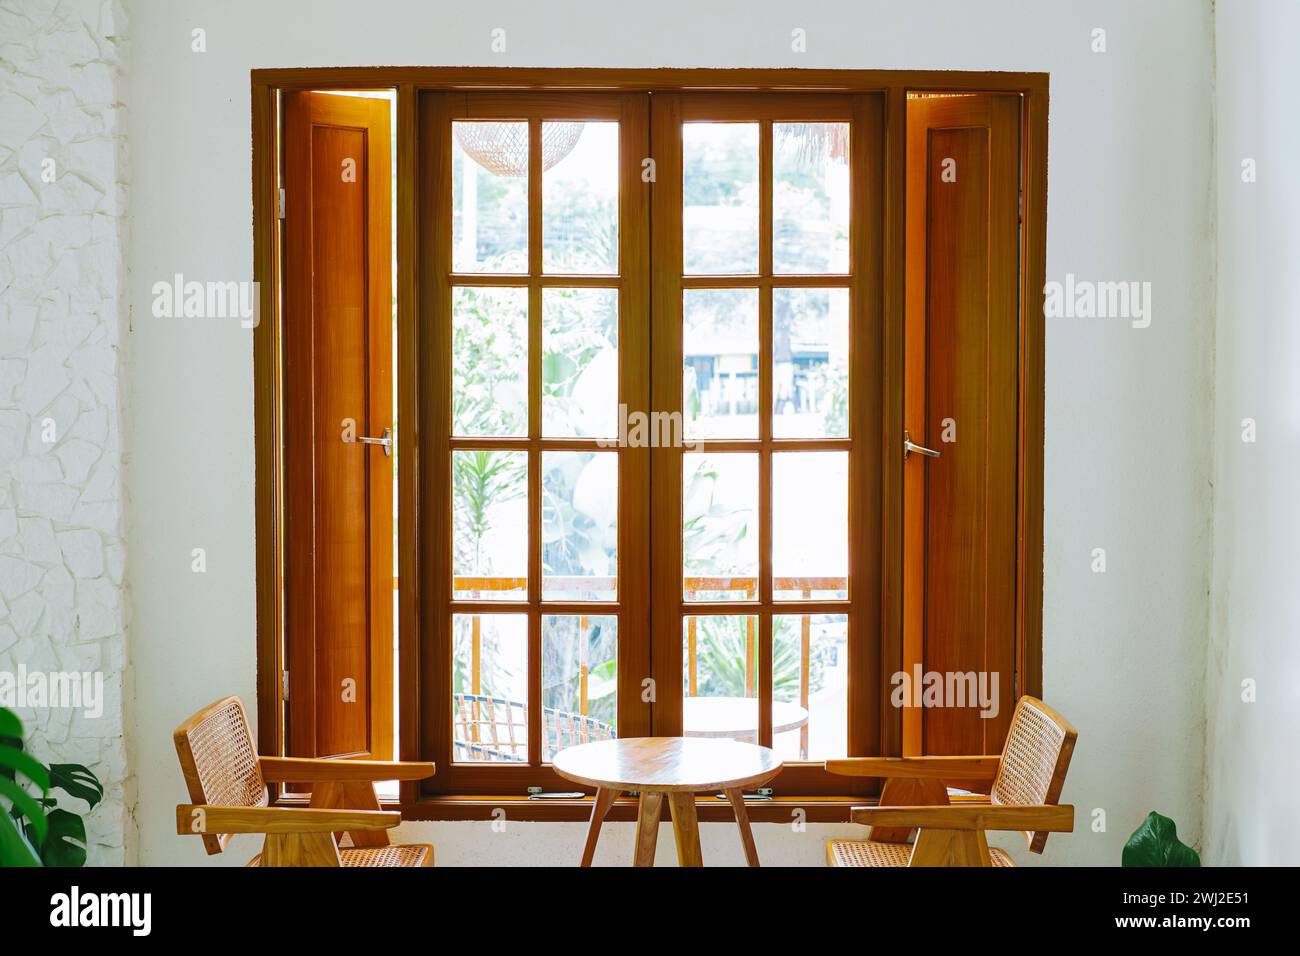 Indoor table setting with a large wooden window. Tropical interior concept. Stock Photo